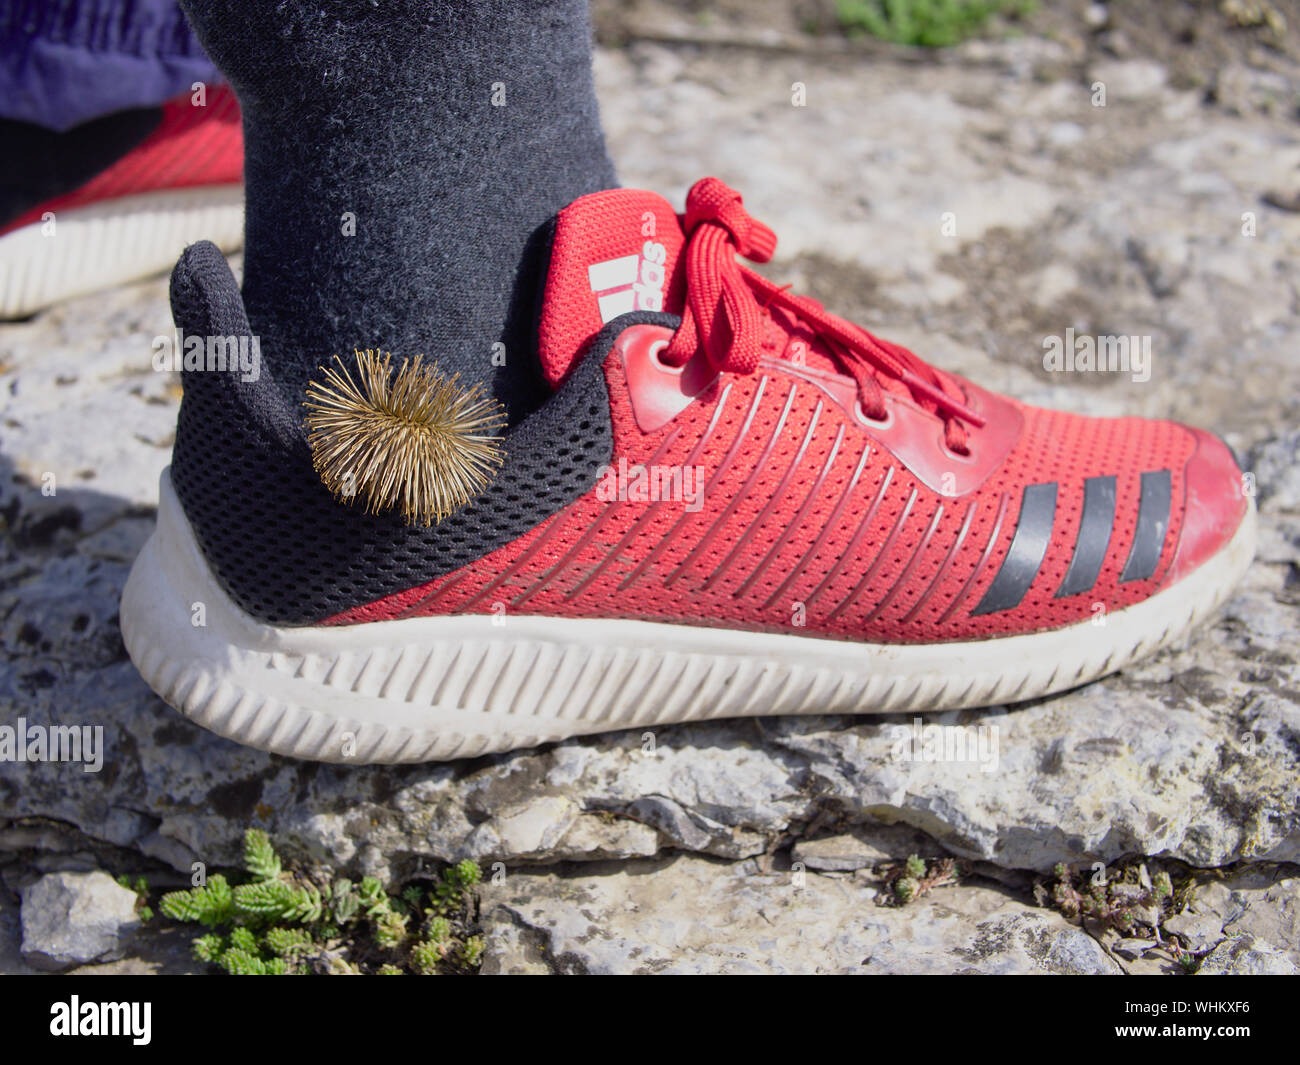 sticky burr burdock on a young boys pair of shiny new red adidas running shoes WHKXF6